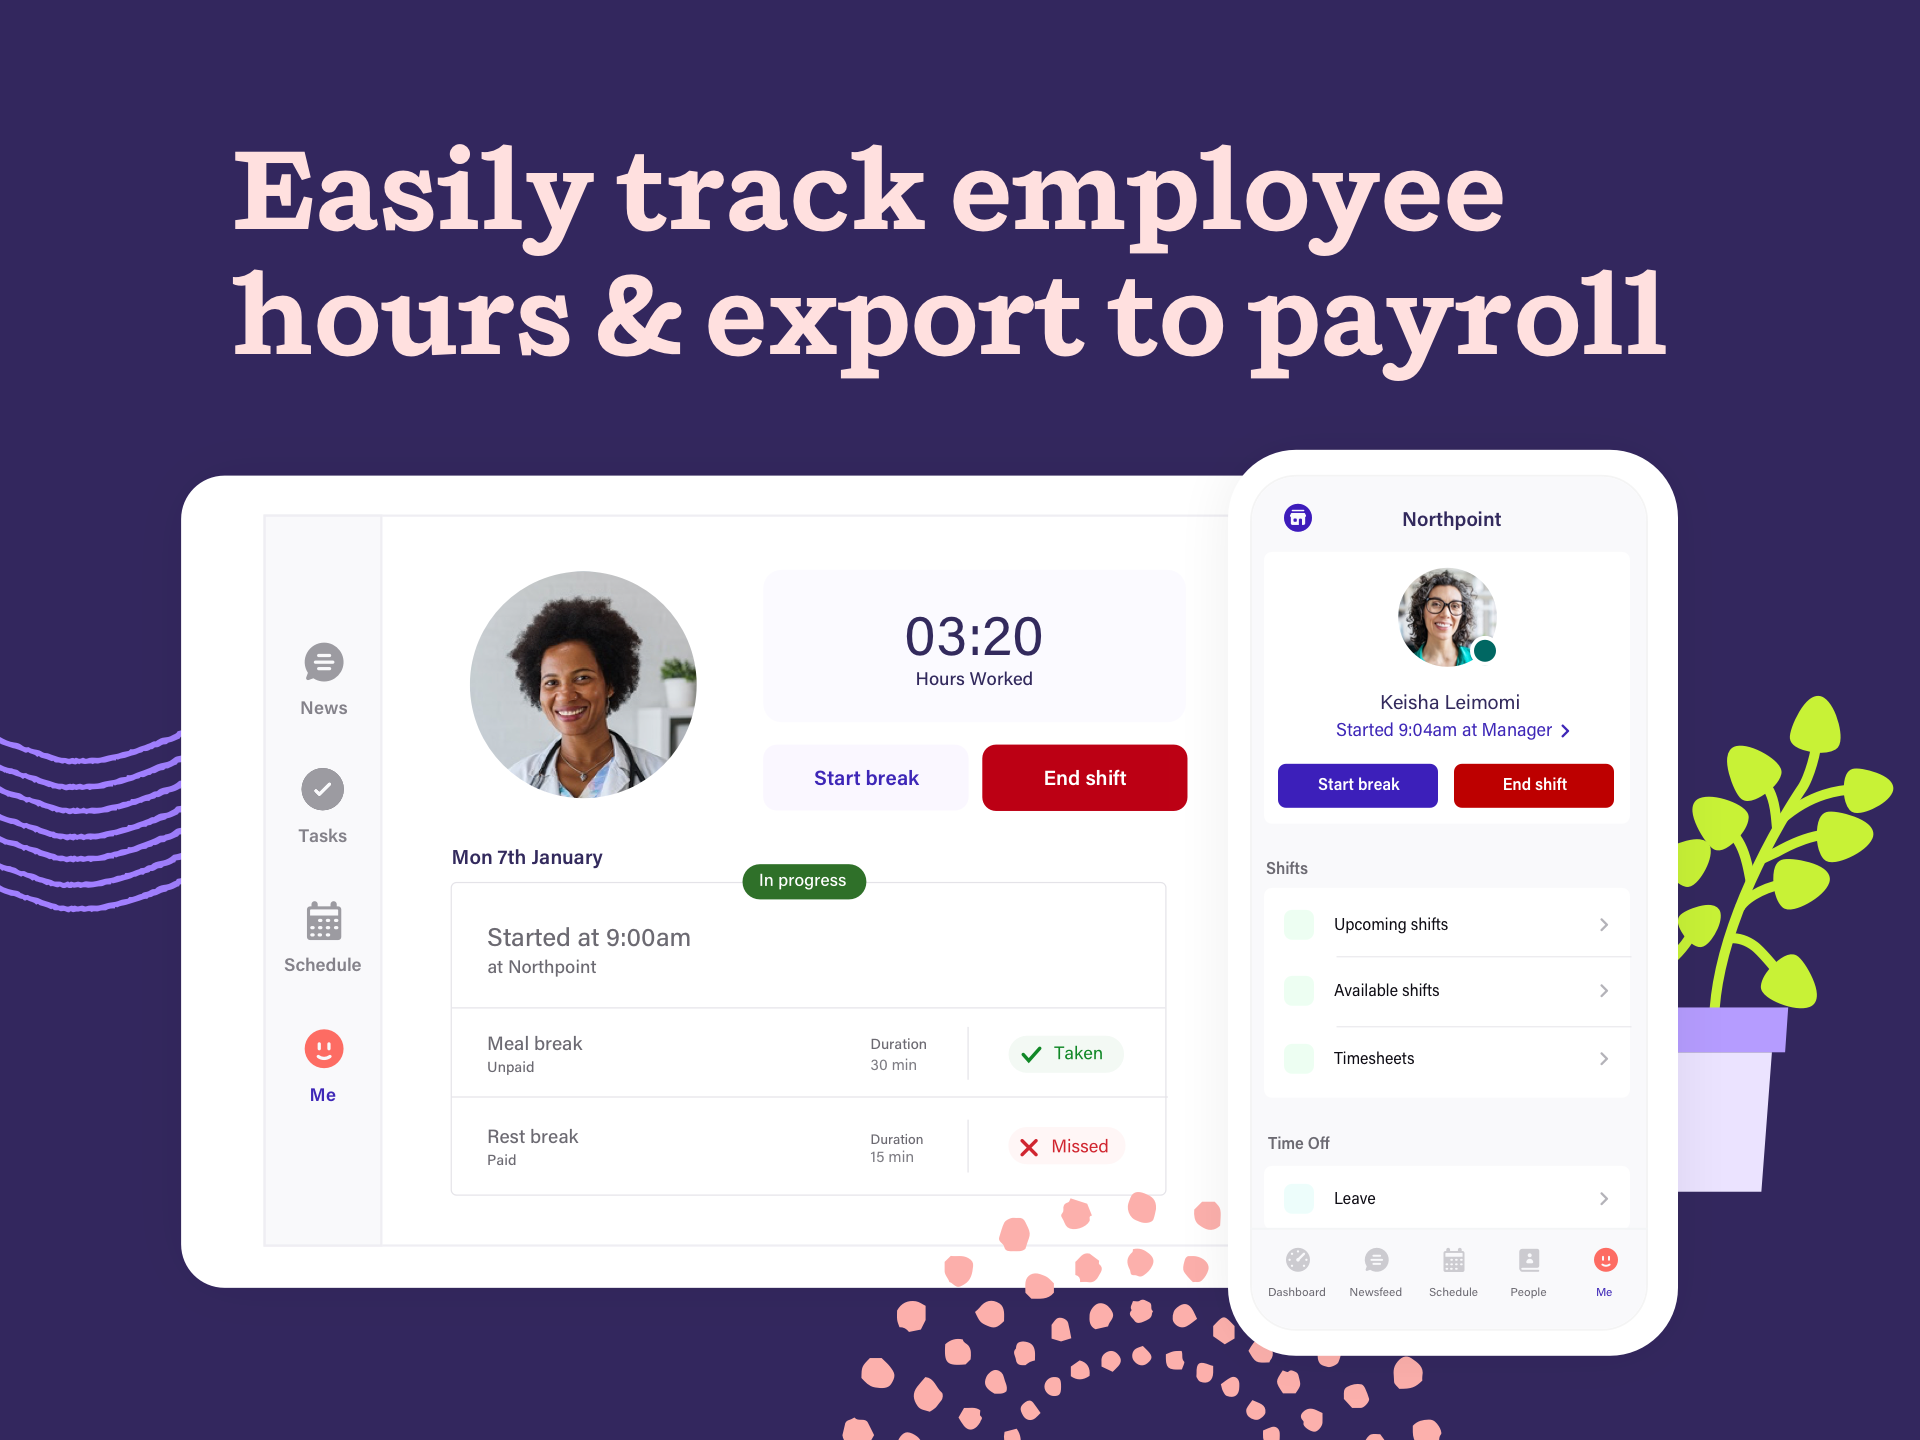 Deputy Software - Make it simple for employees to clock in and out from any device, with geolocation capture and facial recognition. Streamline timesheets and attendance records, seamlessly export to payroll.